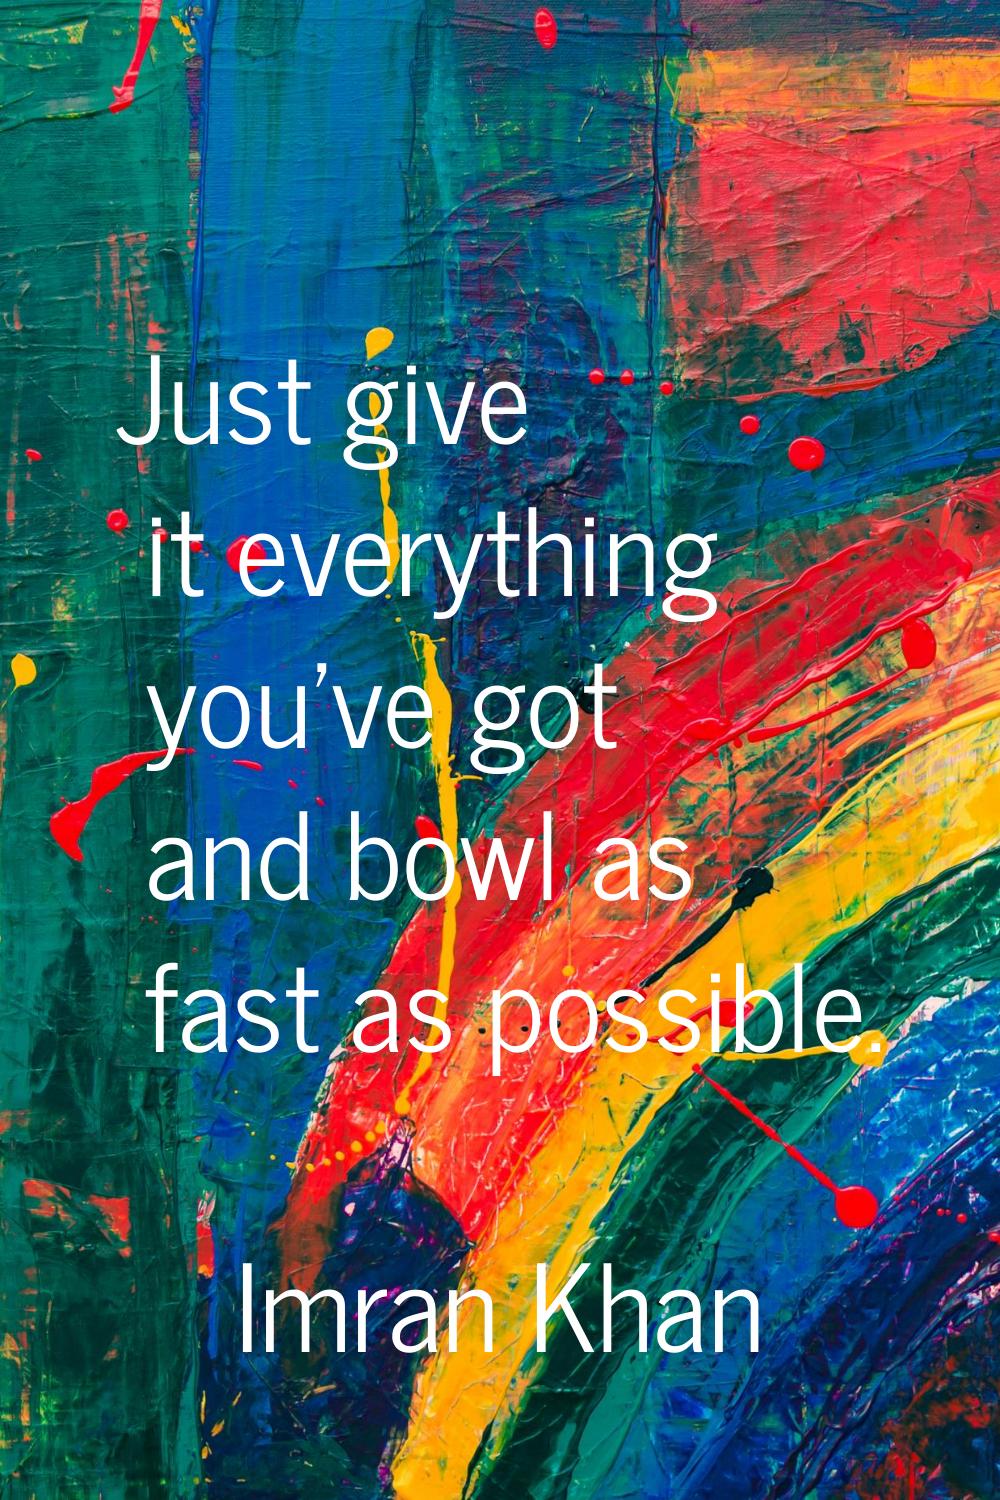 Just give it everything you've got and bowl as fast as possible.